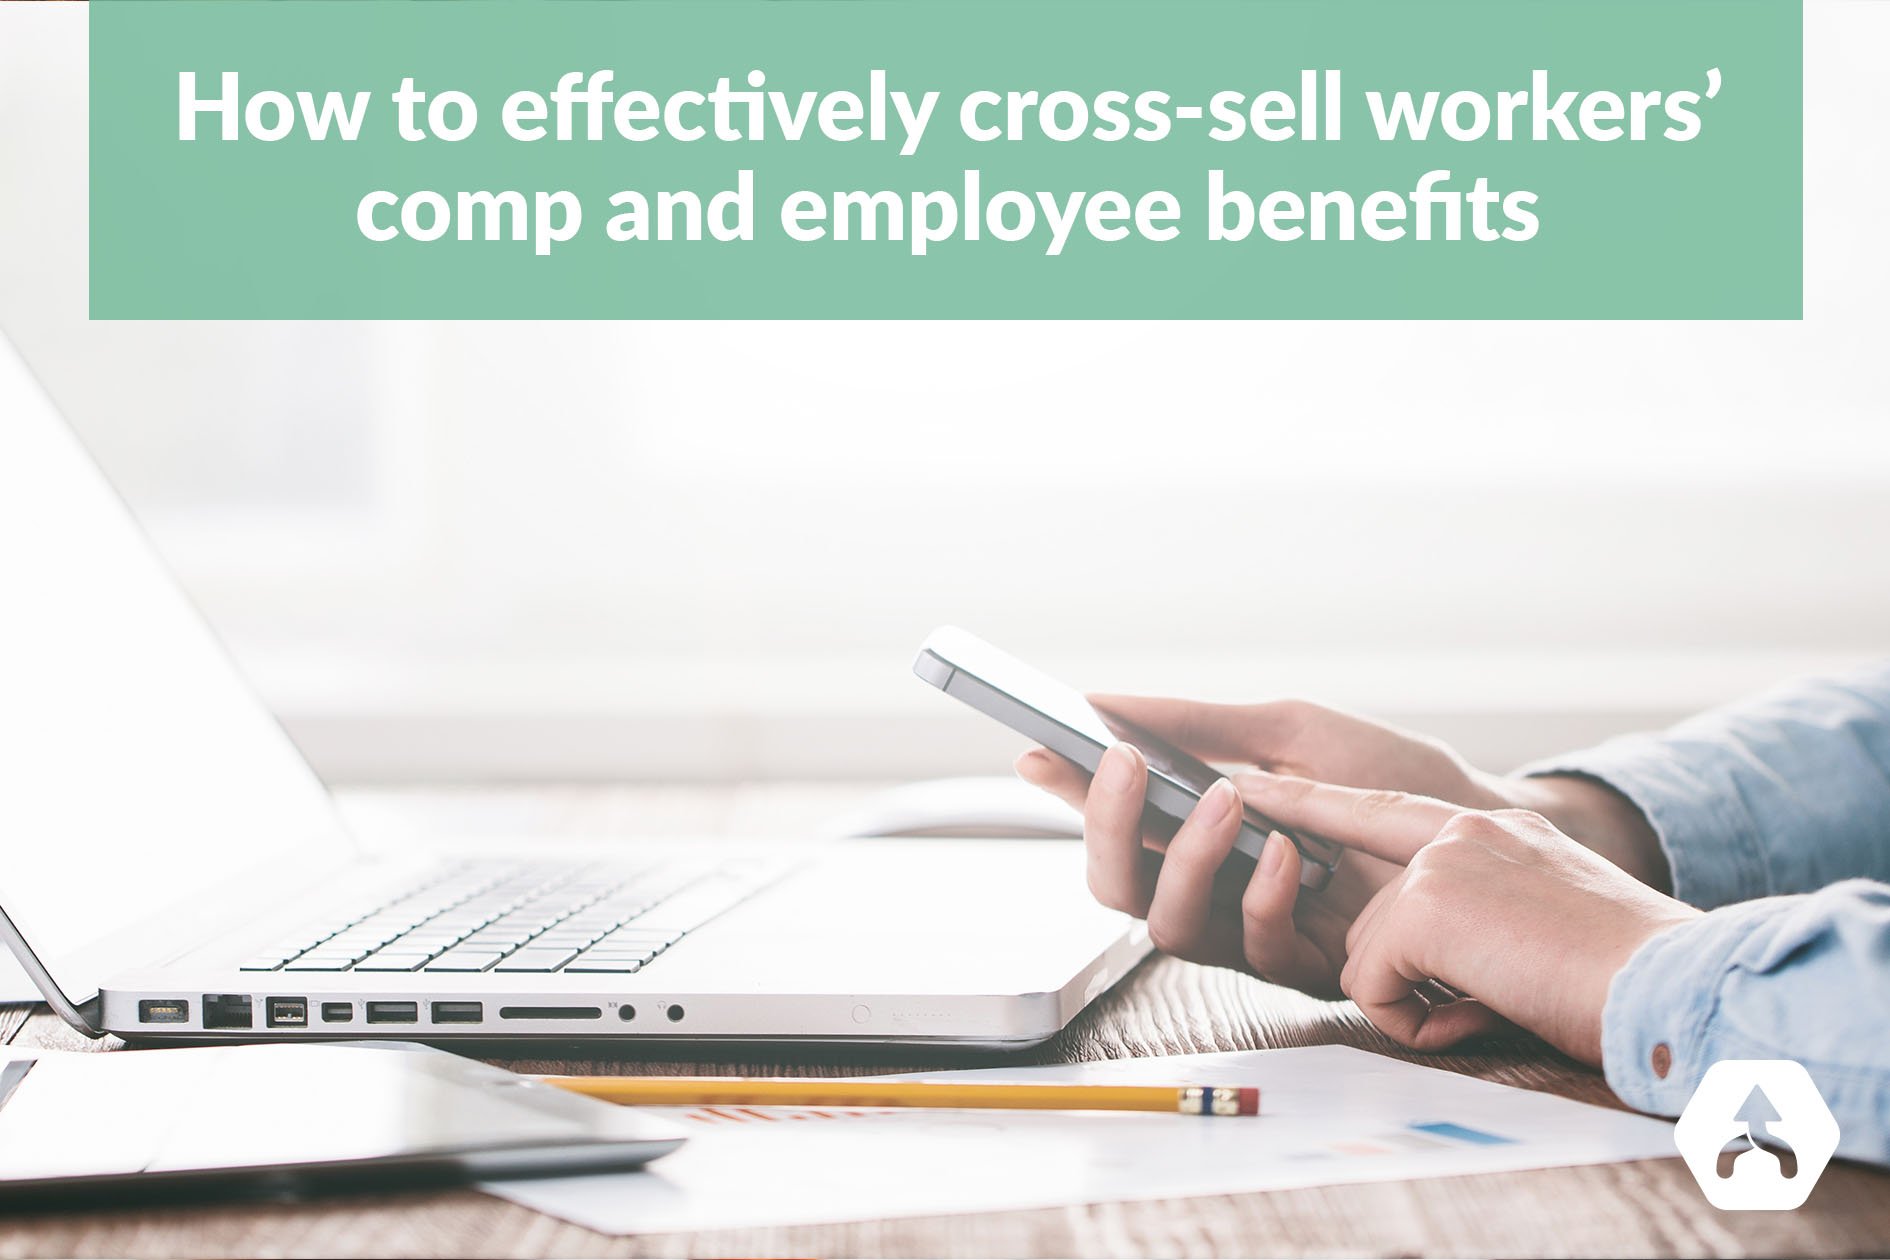 How to effectively cross-sell workers' comp and employee benefits